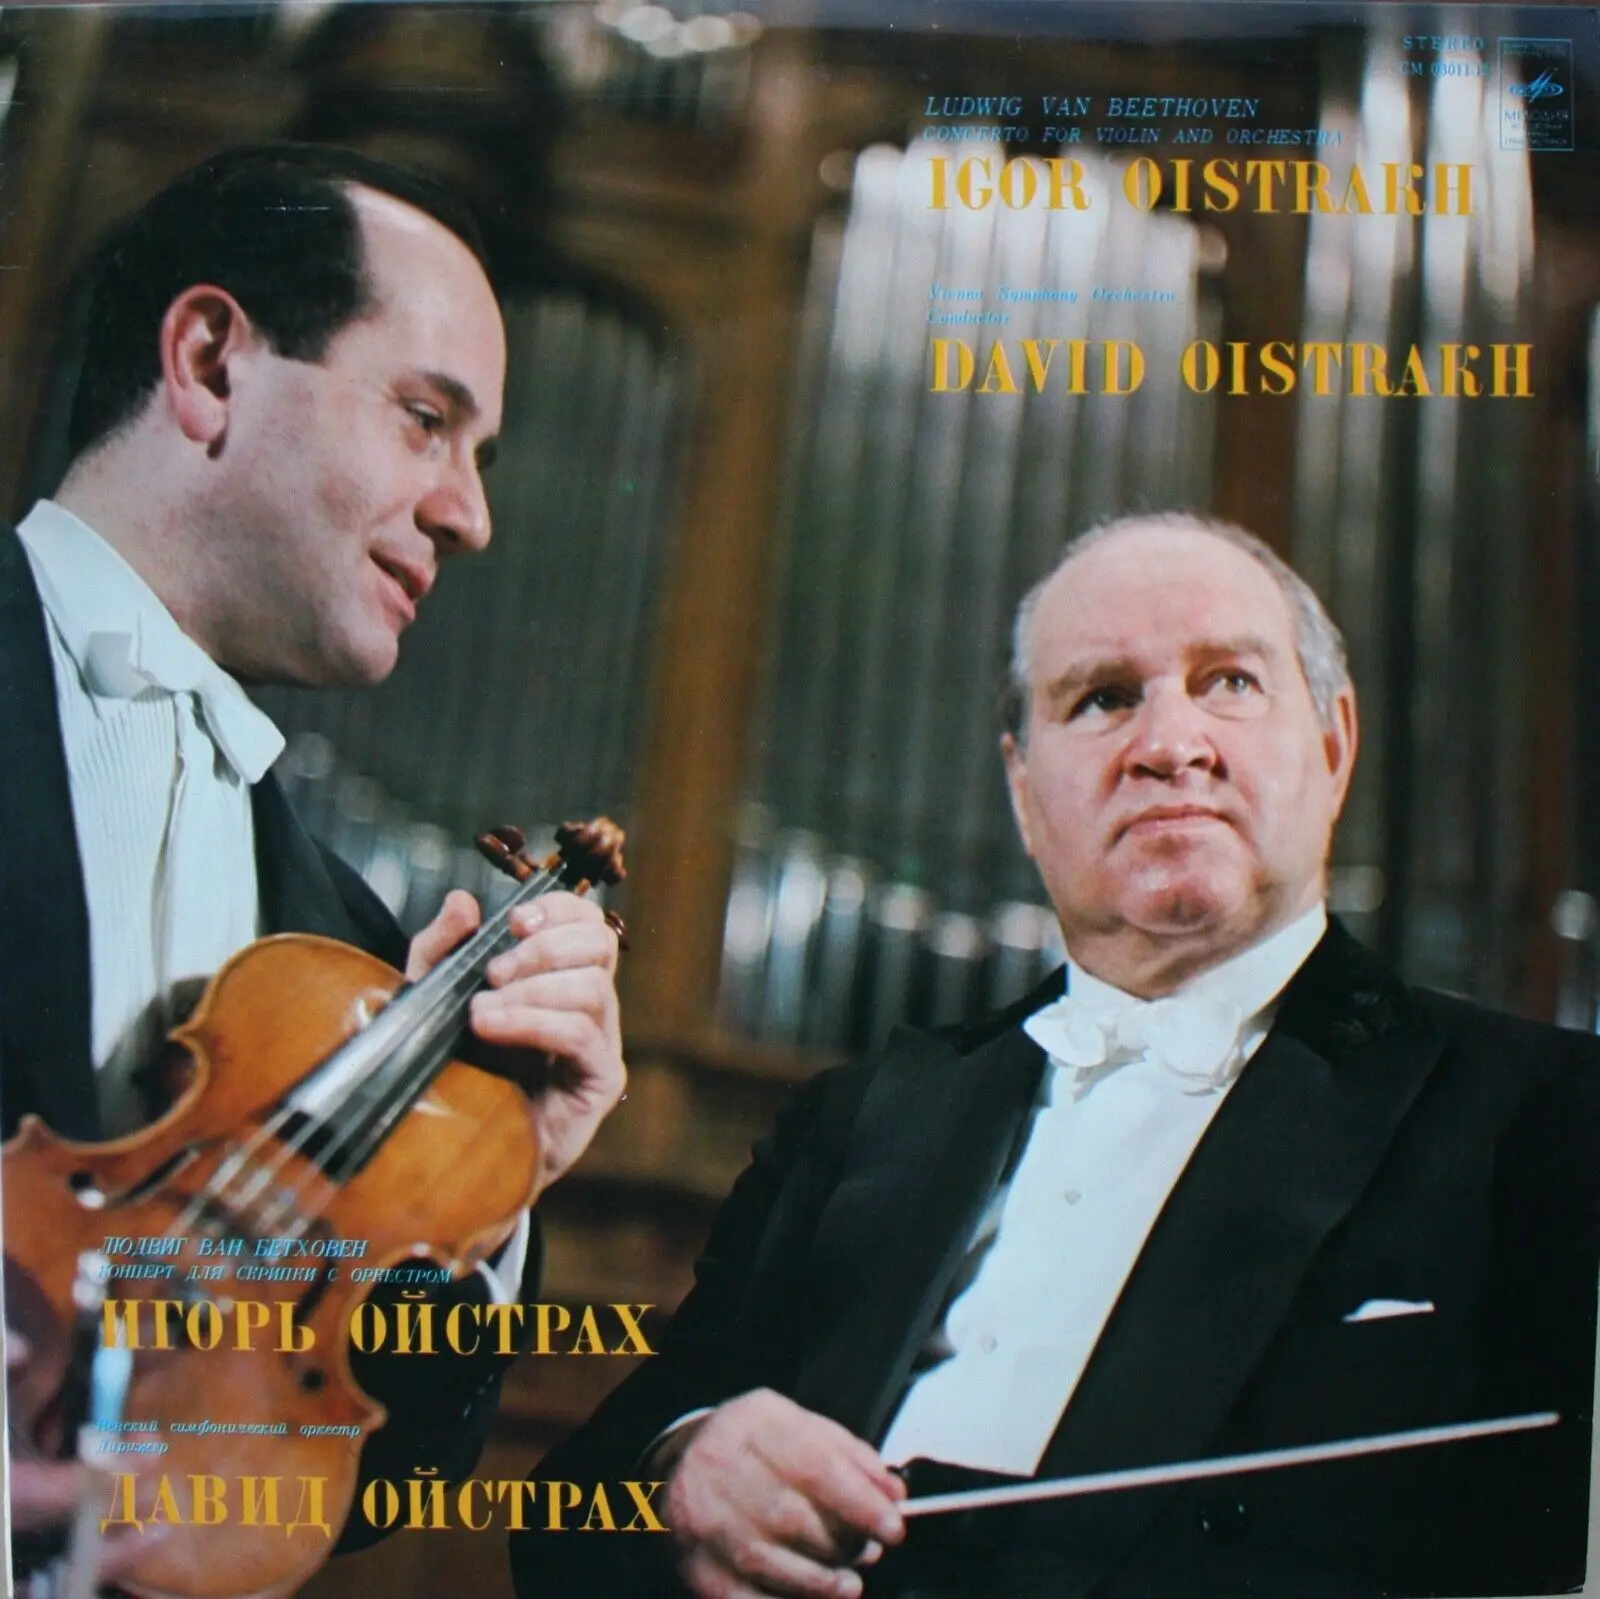 david and igor oistrach great violines world - What is David Oistrakh famous for